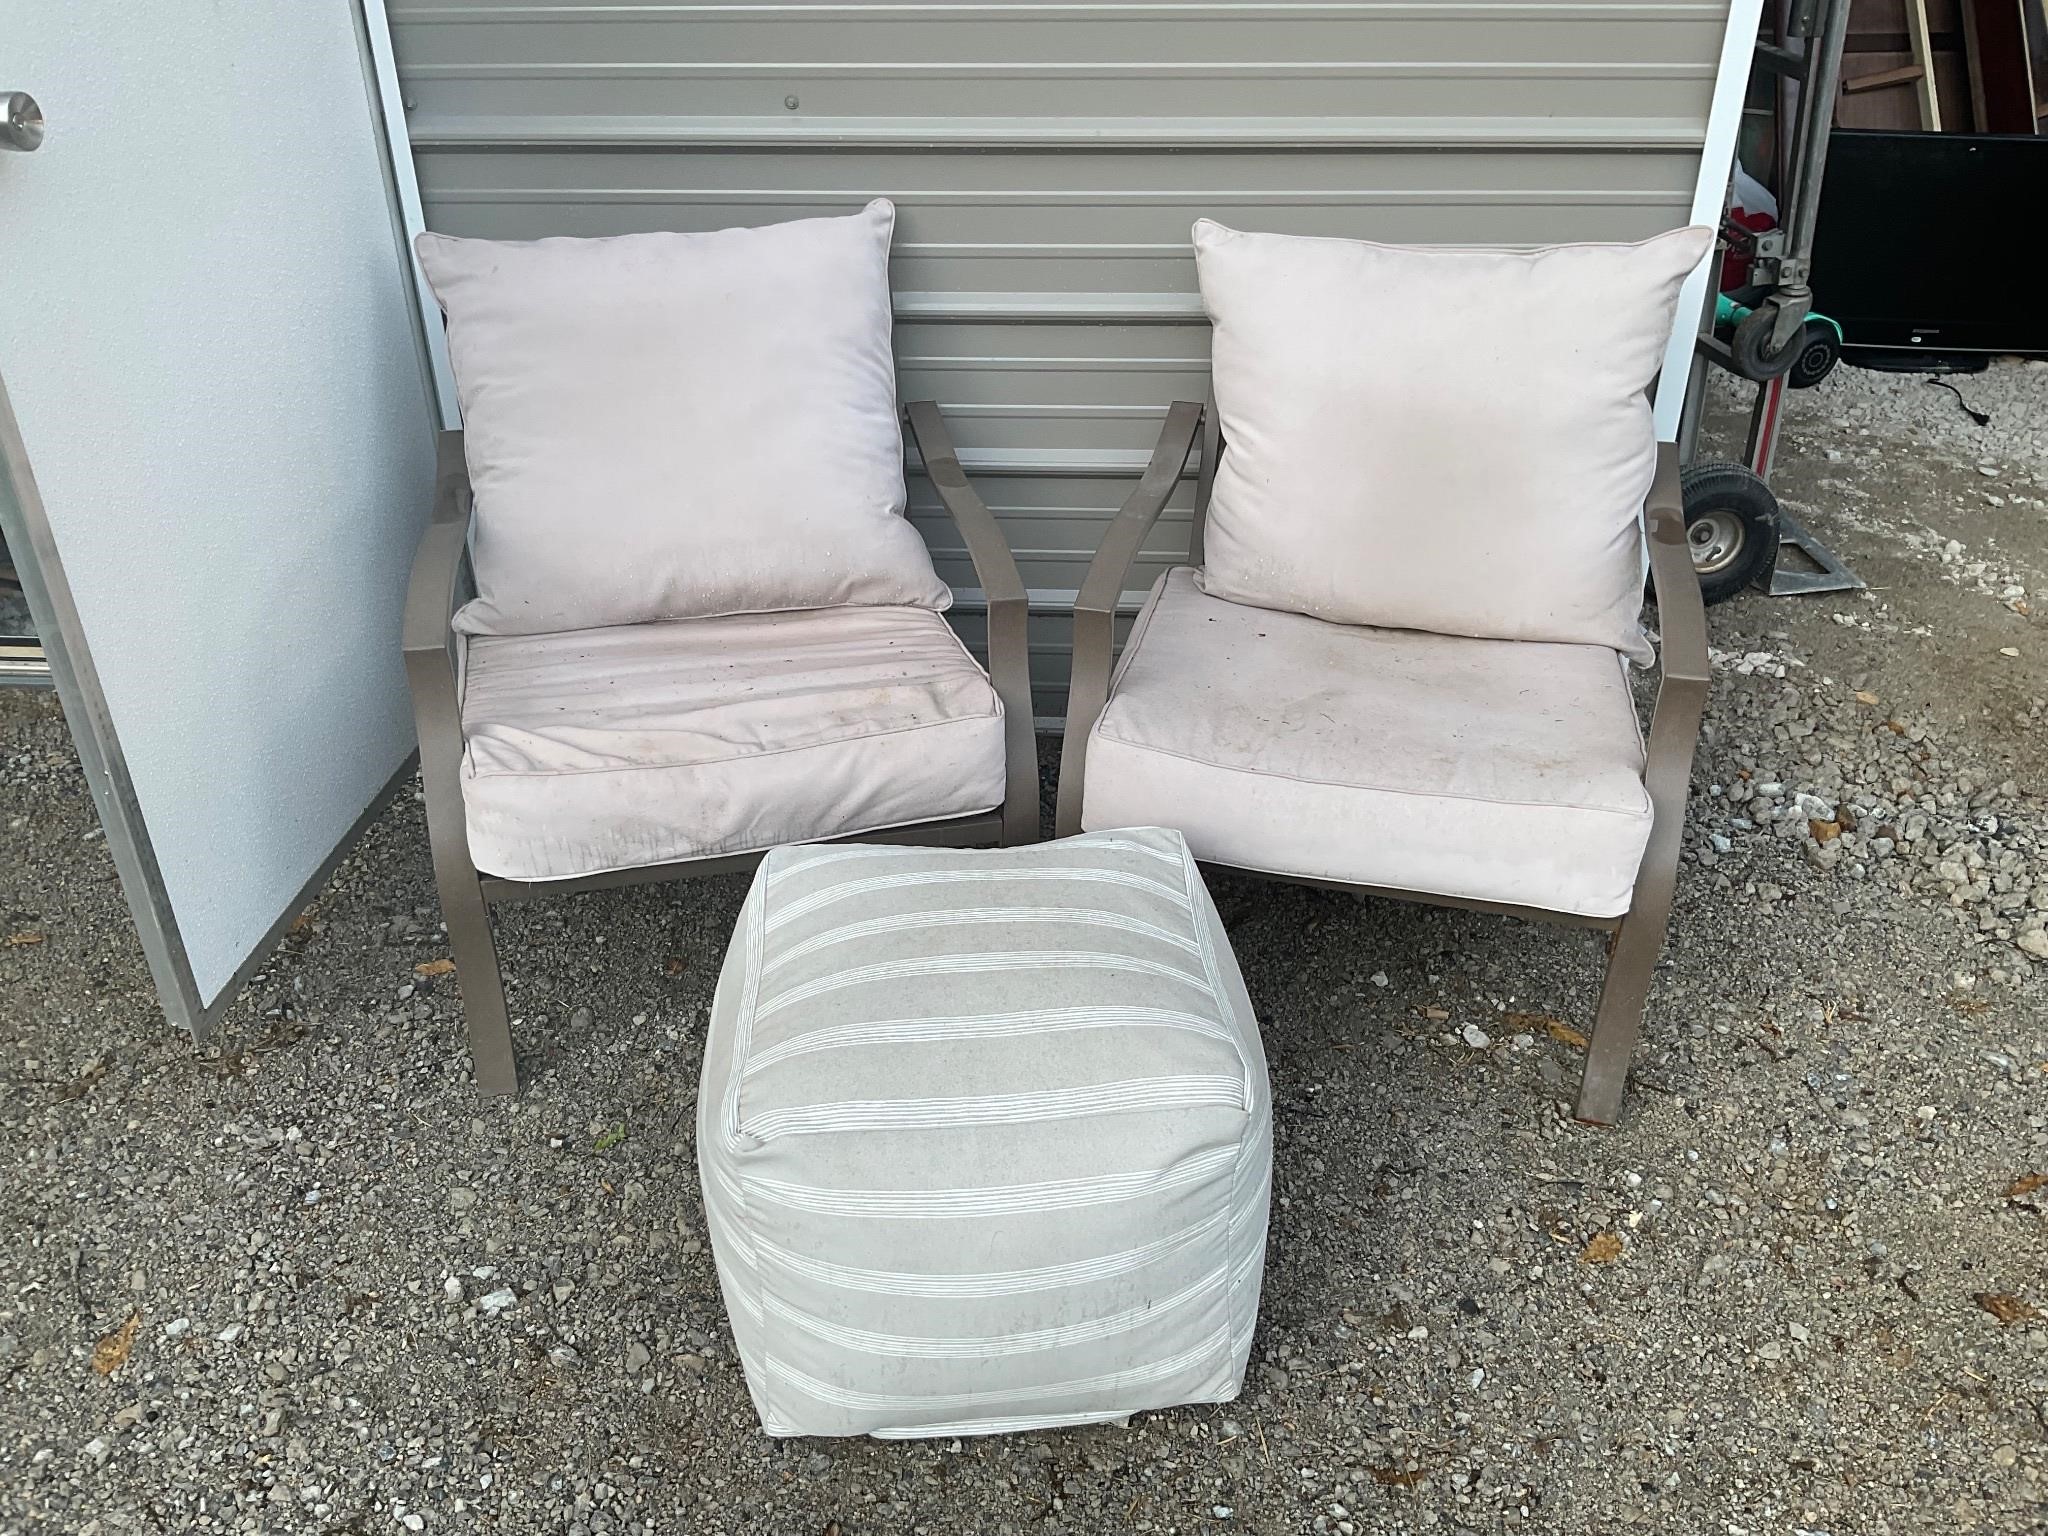 Two outdoor patio chairs, and footstool